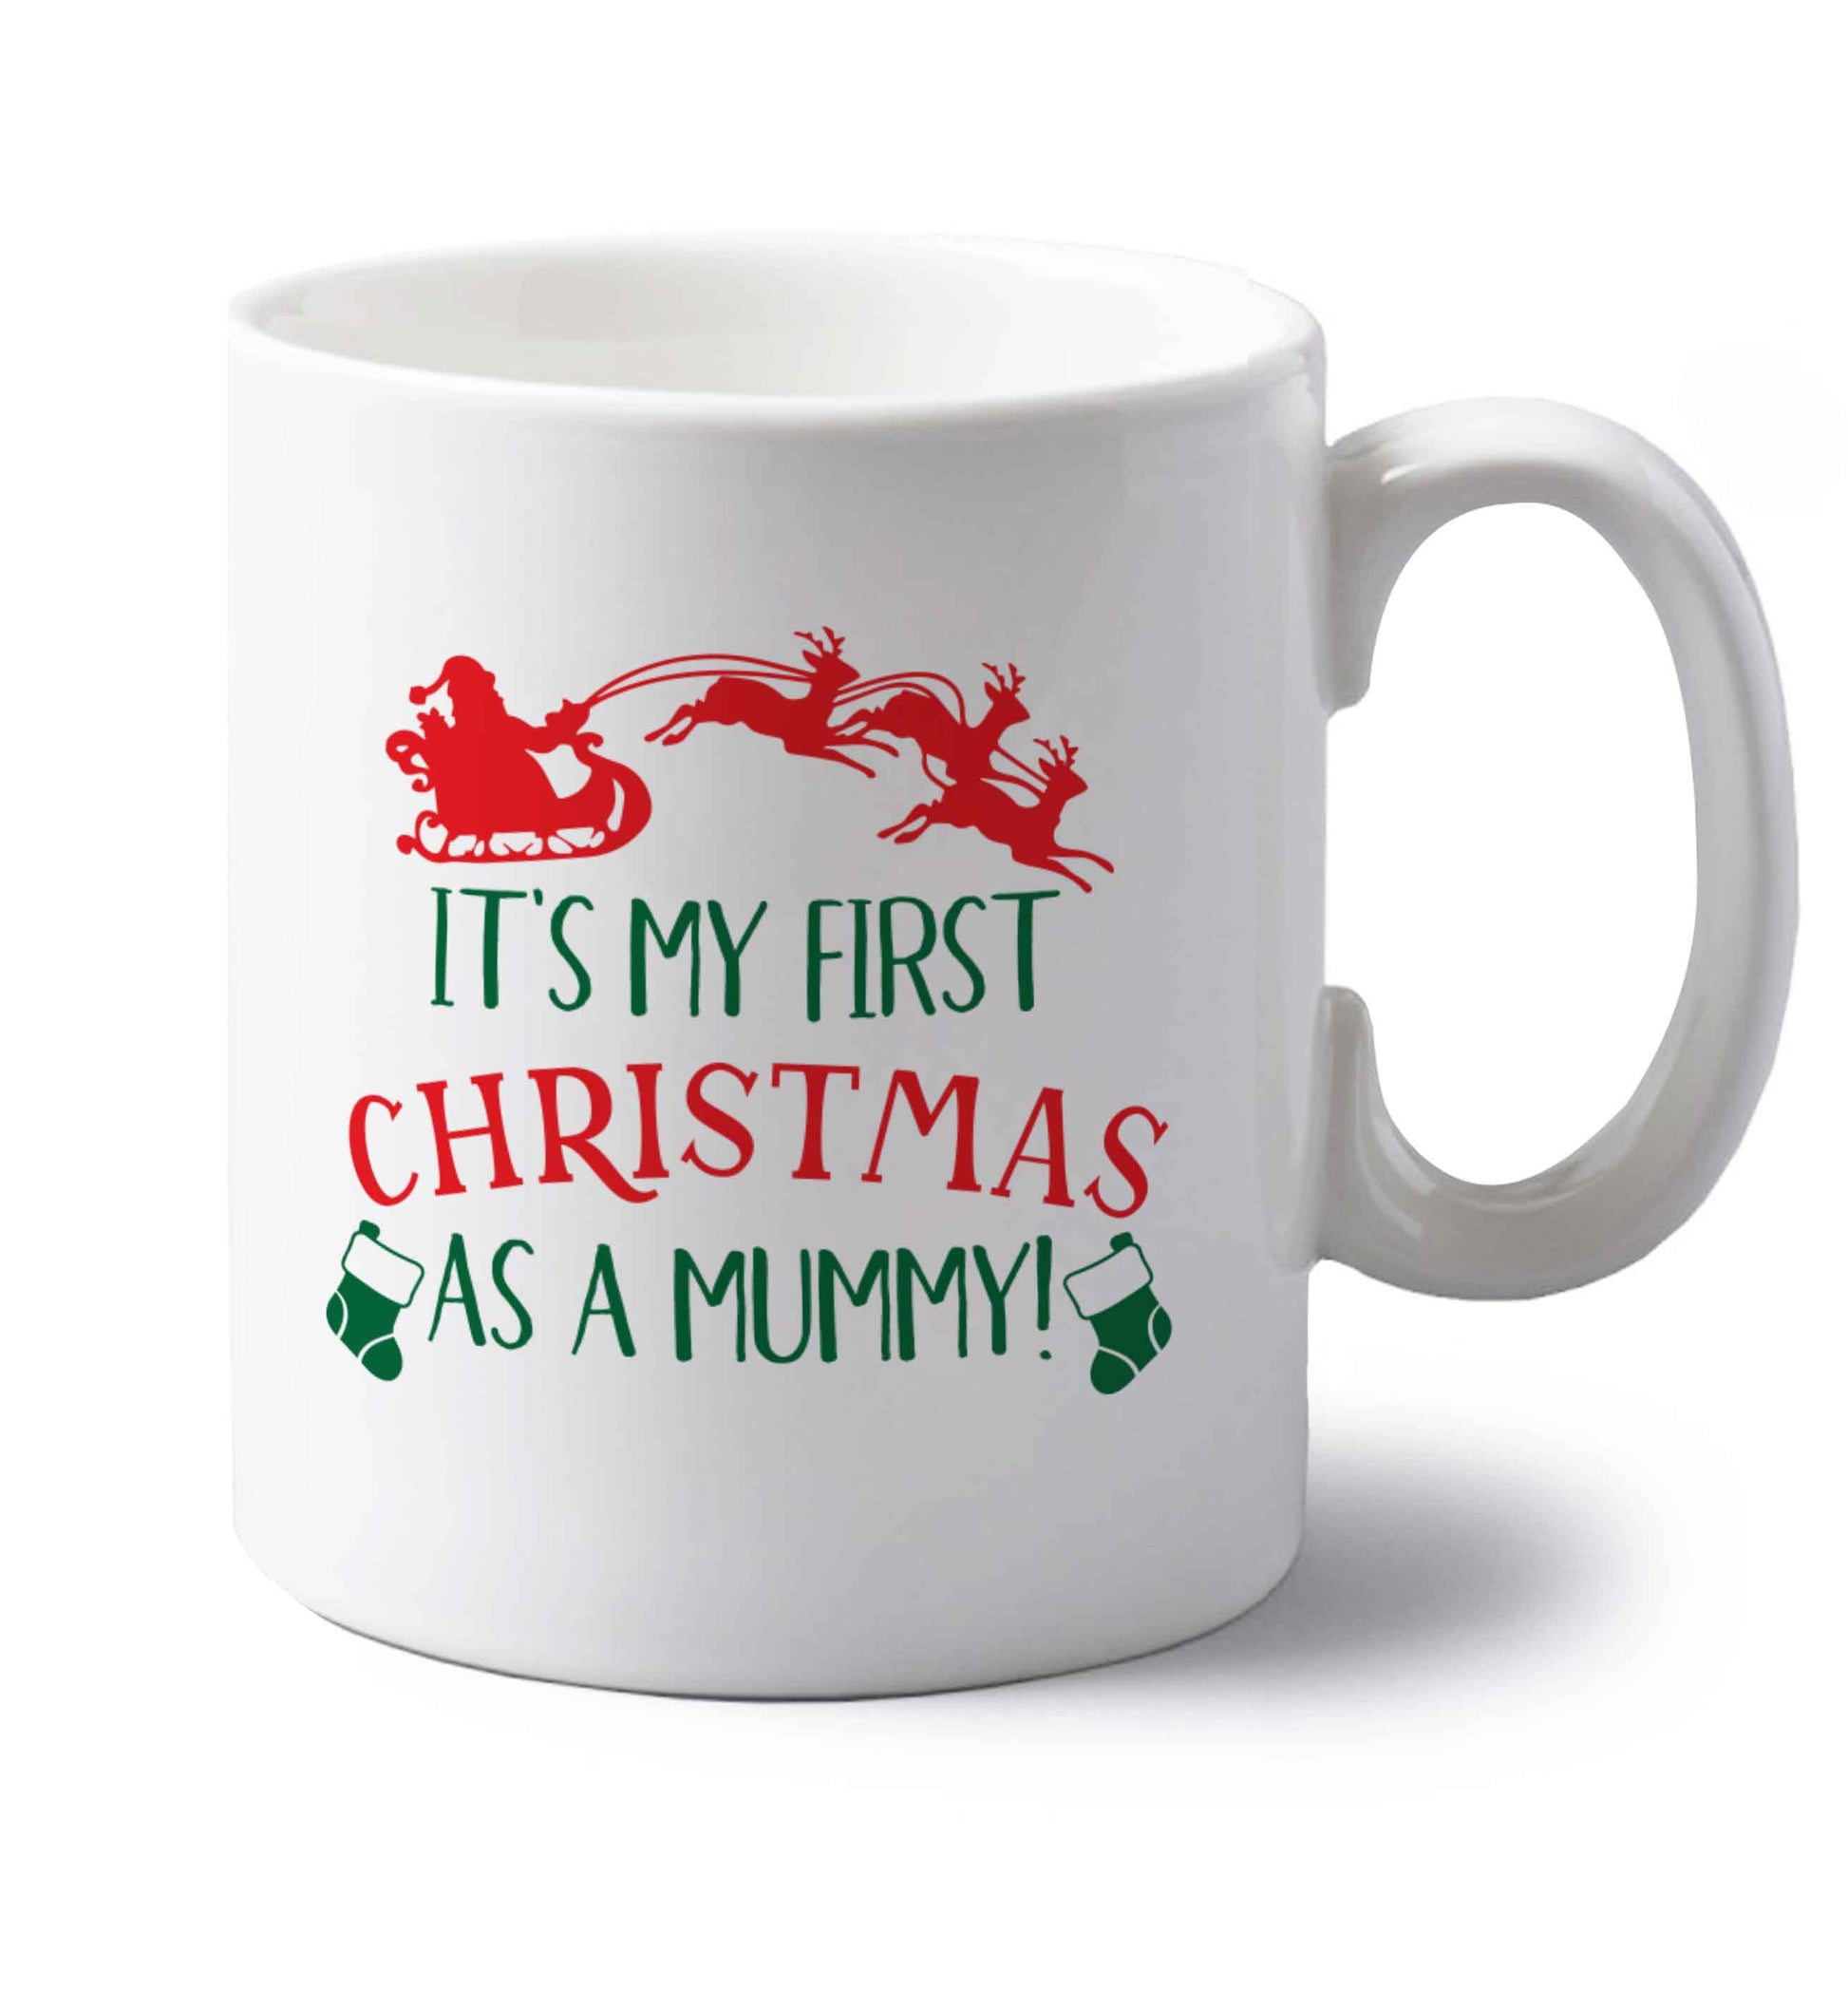 It's my first Christmas as a mummy left handed white ceramic mug 